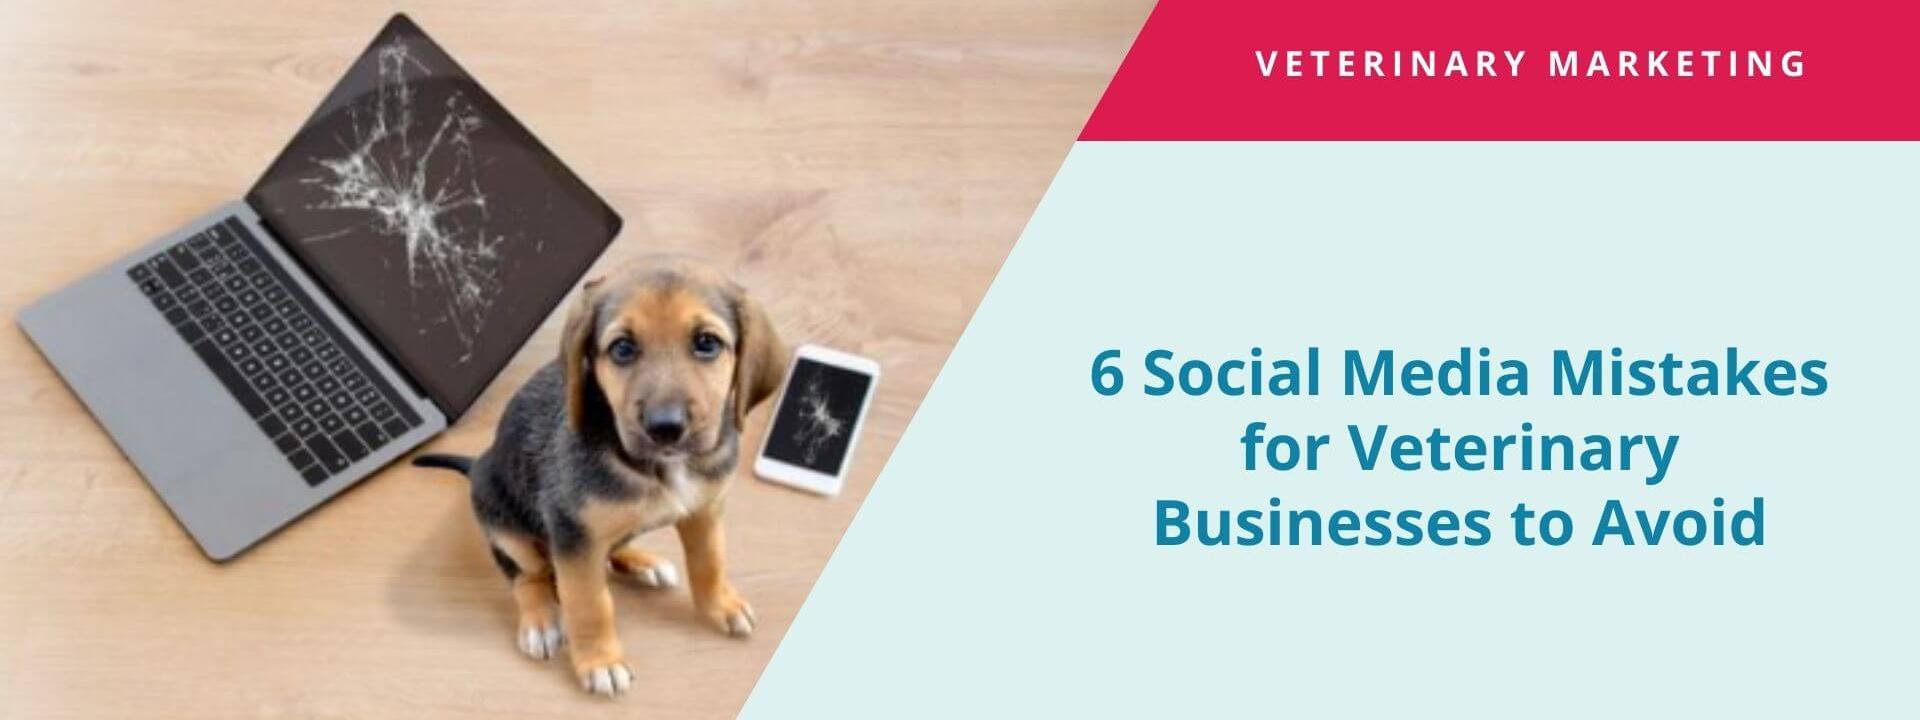 Oops! 6 Social Media Mistakes for Veterinary Businesses to Avoid